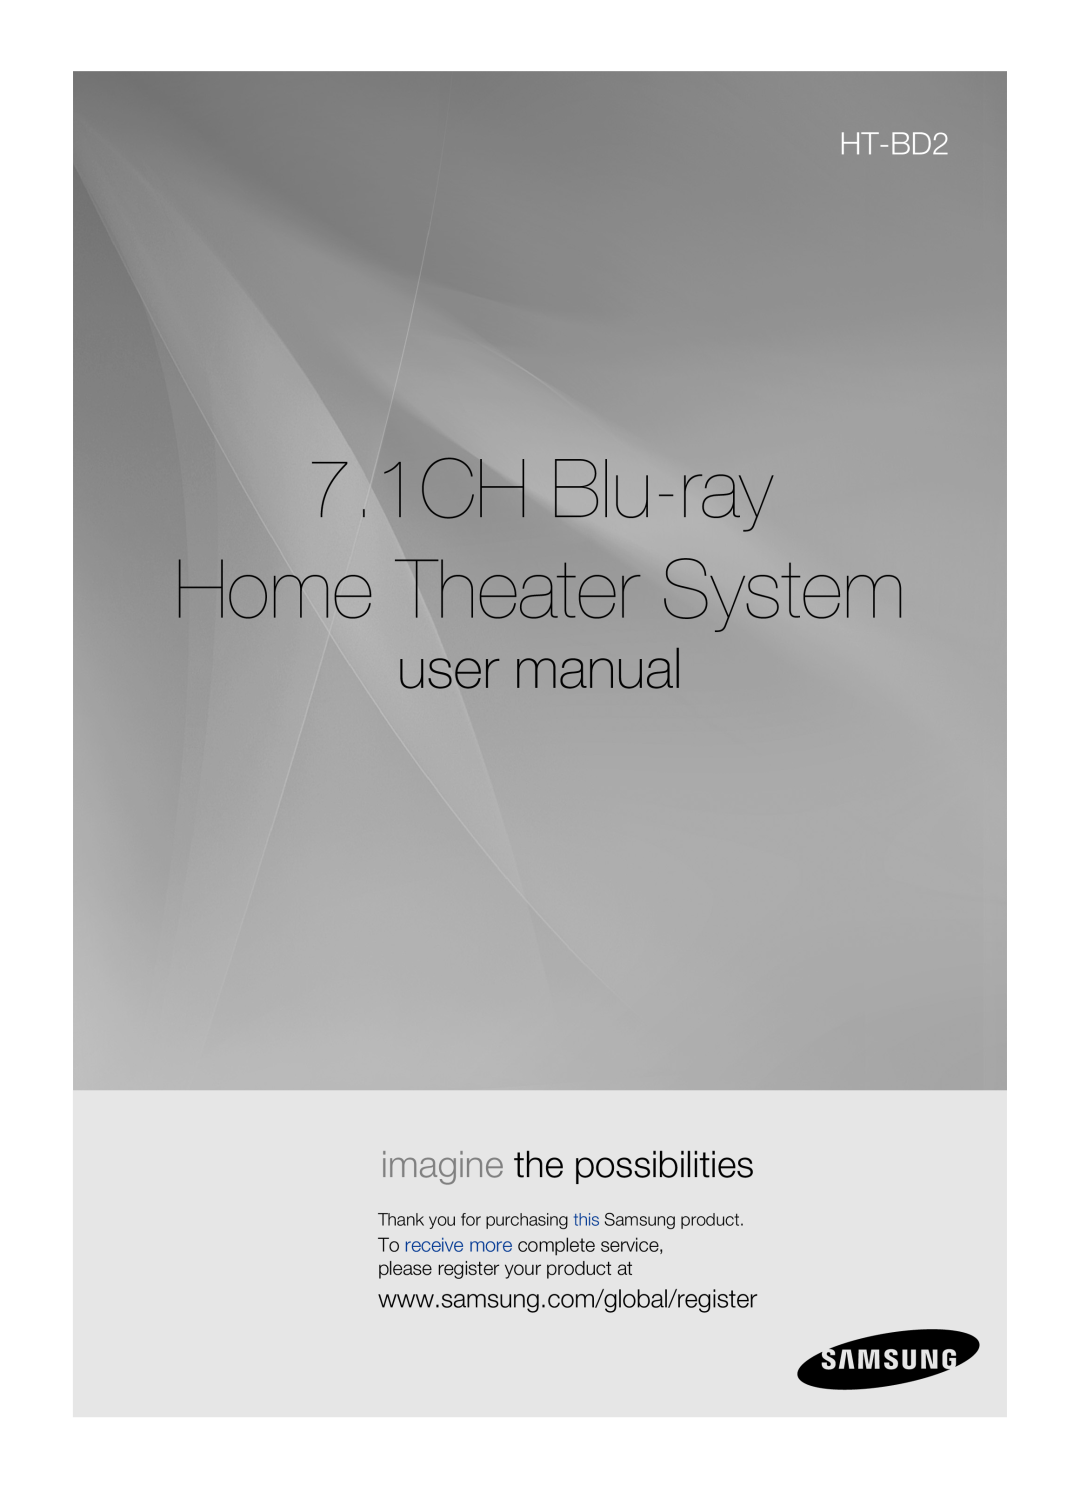 Samsung AH68-02019S 7.1CH Blu-ray Home Theater System, user manual, imagine the possibilities, HT-BD2 